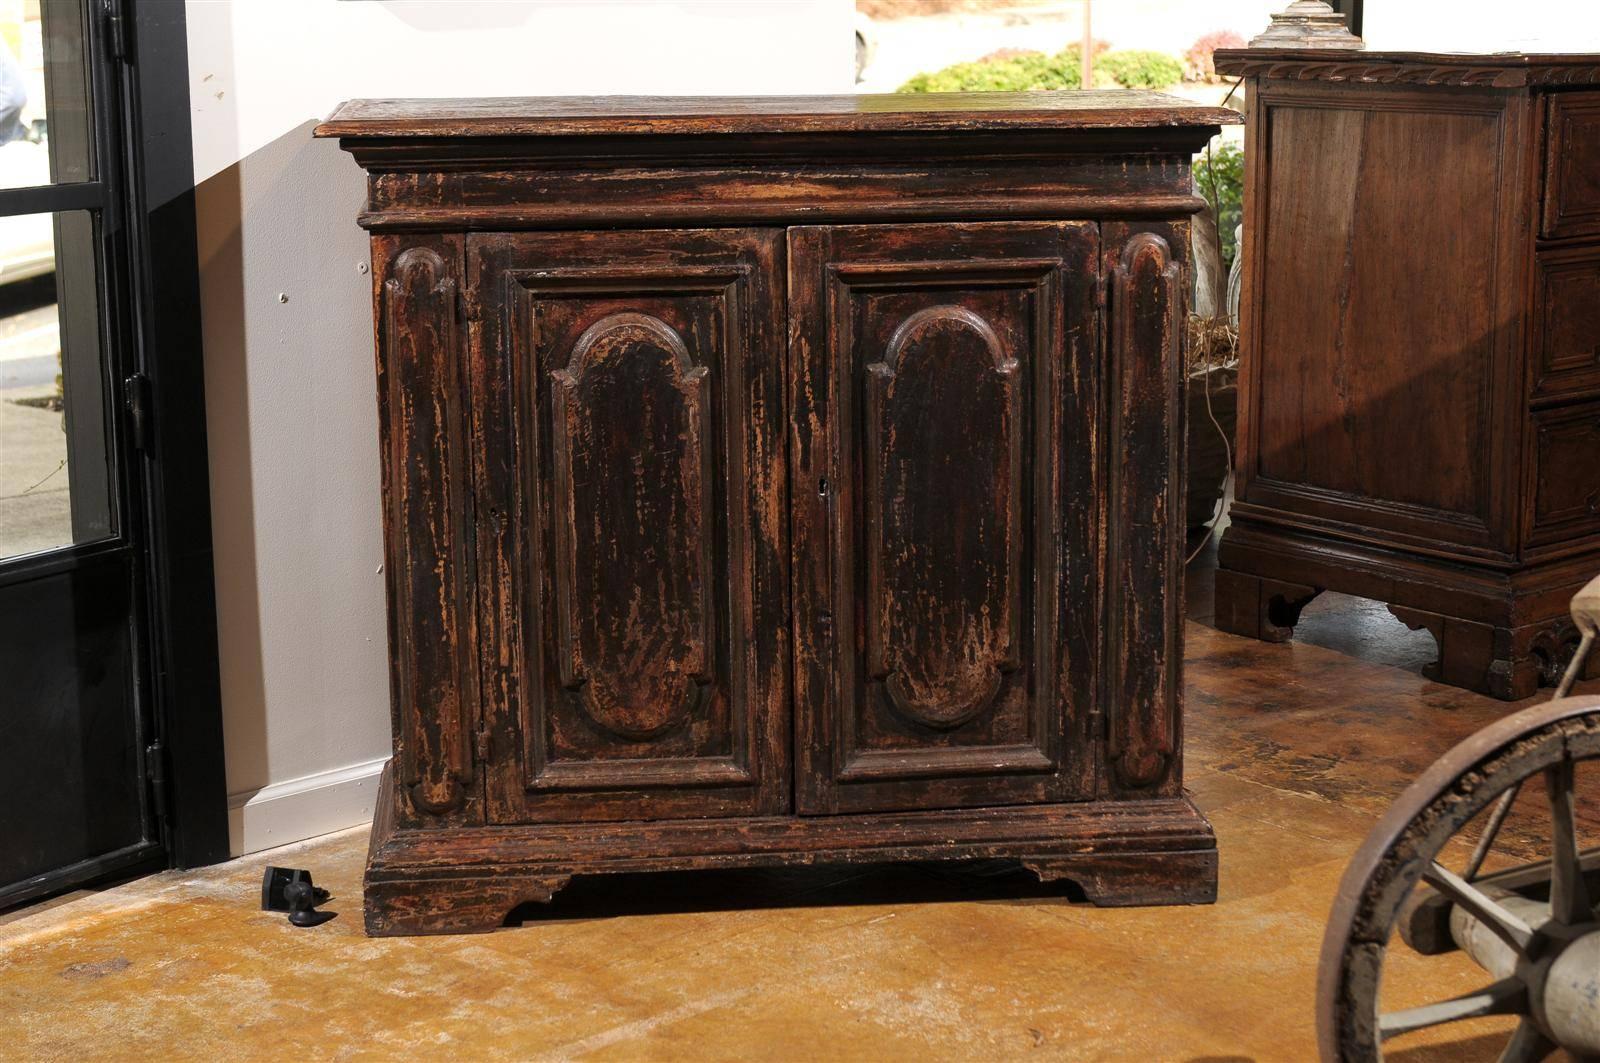 This pair of Italian late 19th century tall painted wood buffets features simple rectangular cornice tops over two doors with carved vertical cartouche-shaped panels, which are echoed on a narrower scale, on the sides. A functioning key unlocks the